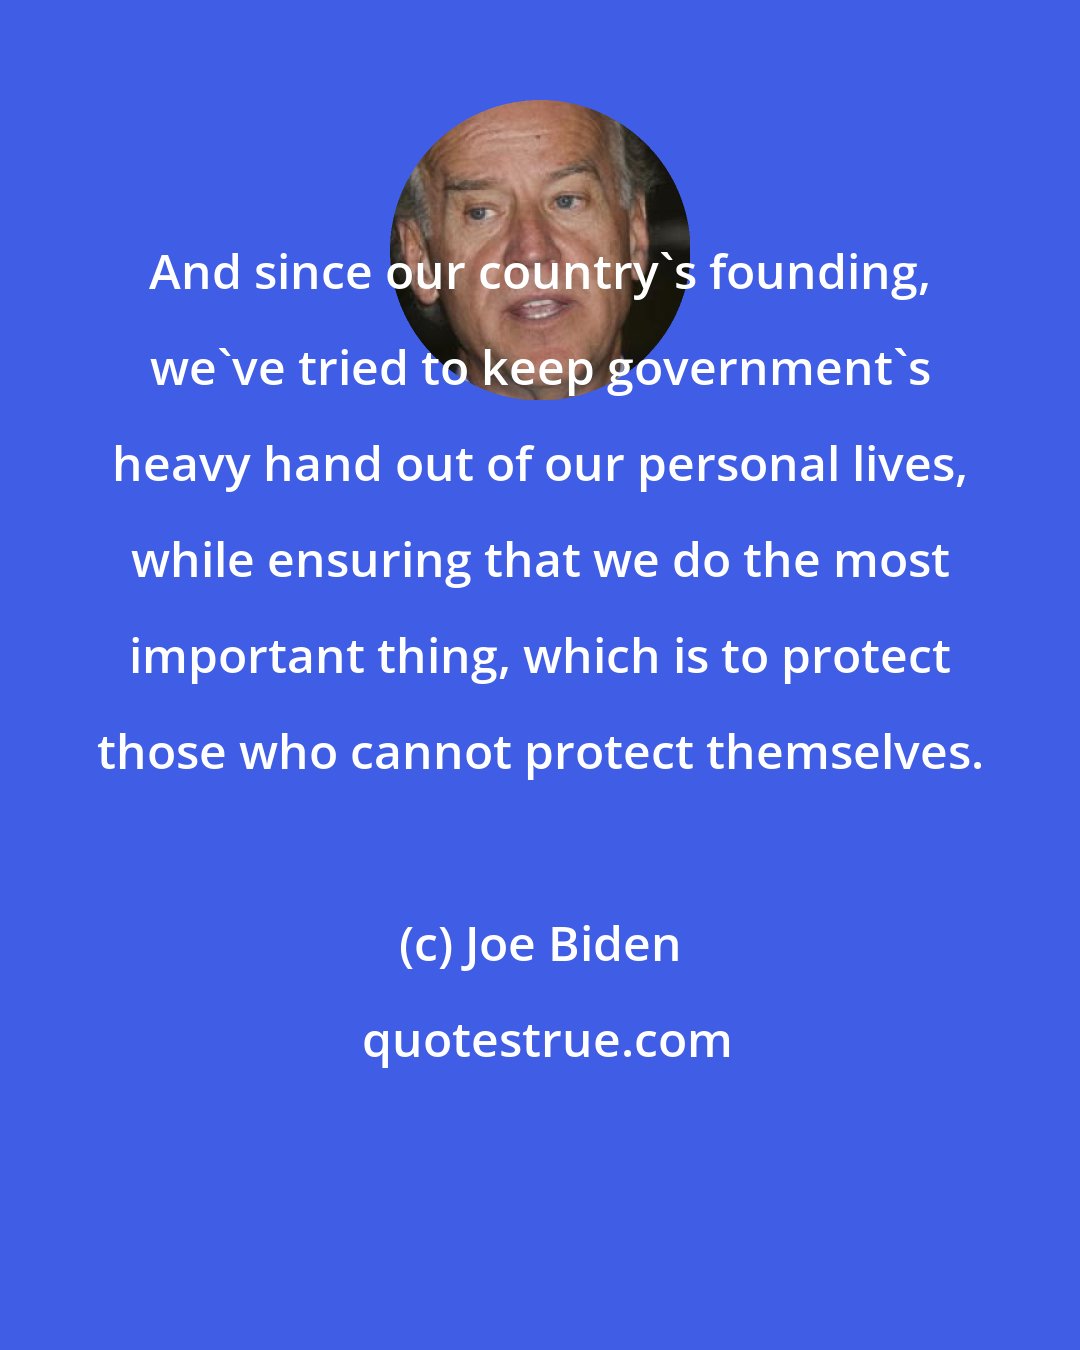 Joe Biden: And since our country's founding, we've tried to keep government's heavy hand out of our personal lives, while ensuring that we do the most important thing, which is to protect those who cannot protect themselves.